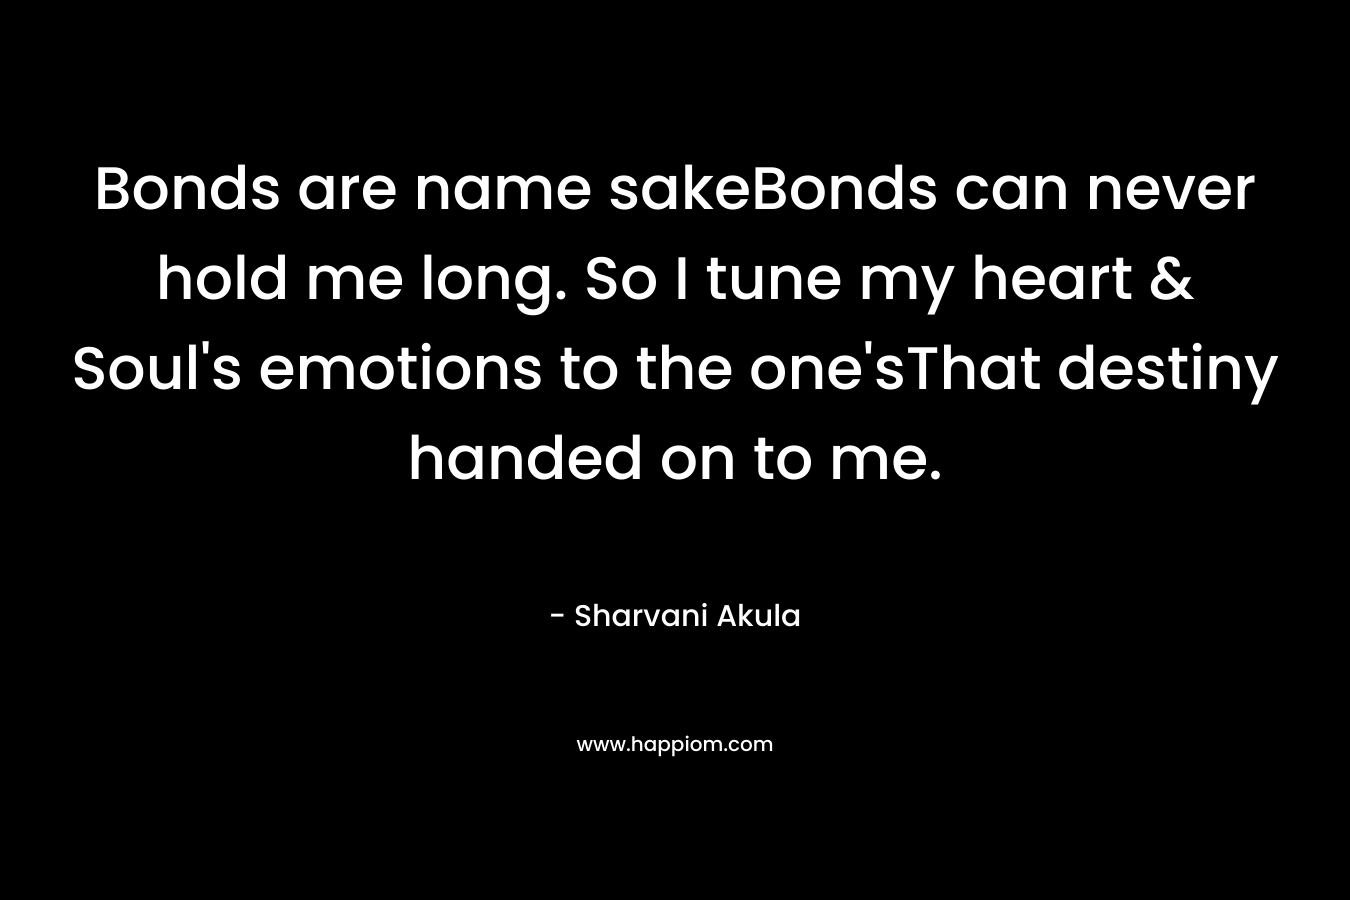 Bonds are name sakeBonds can never hold me long. So I tune my heart & Soul’s emotions to the one’sThat destiny handed on to me. – Sharvani Akula